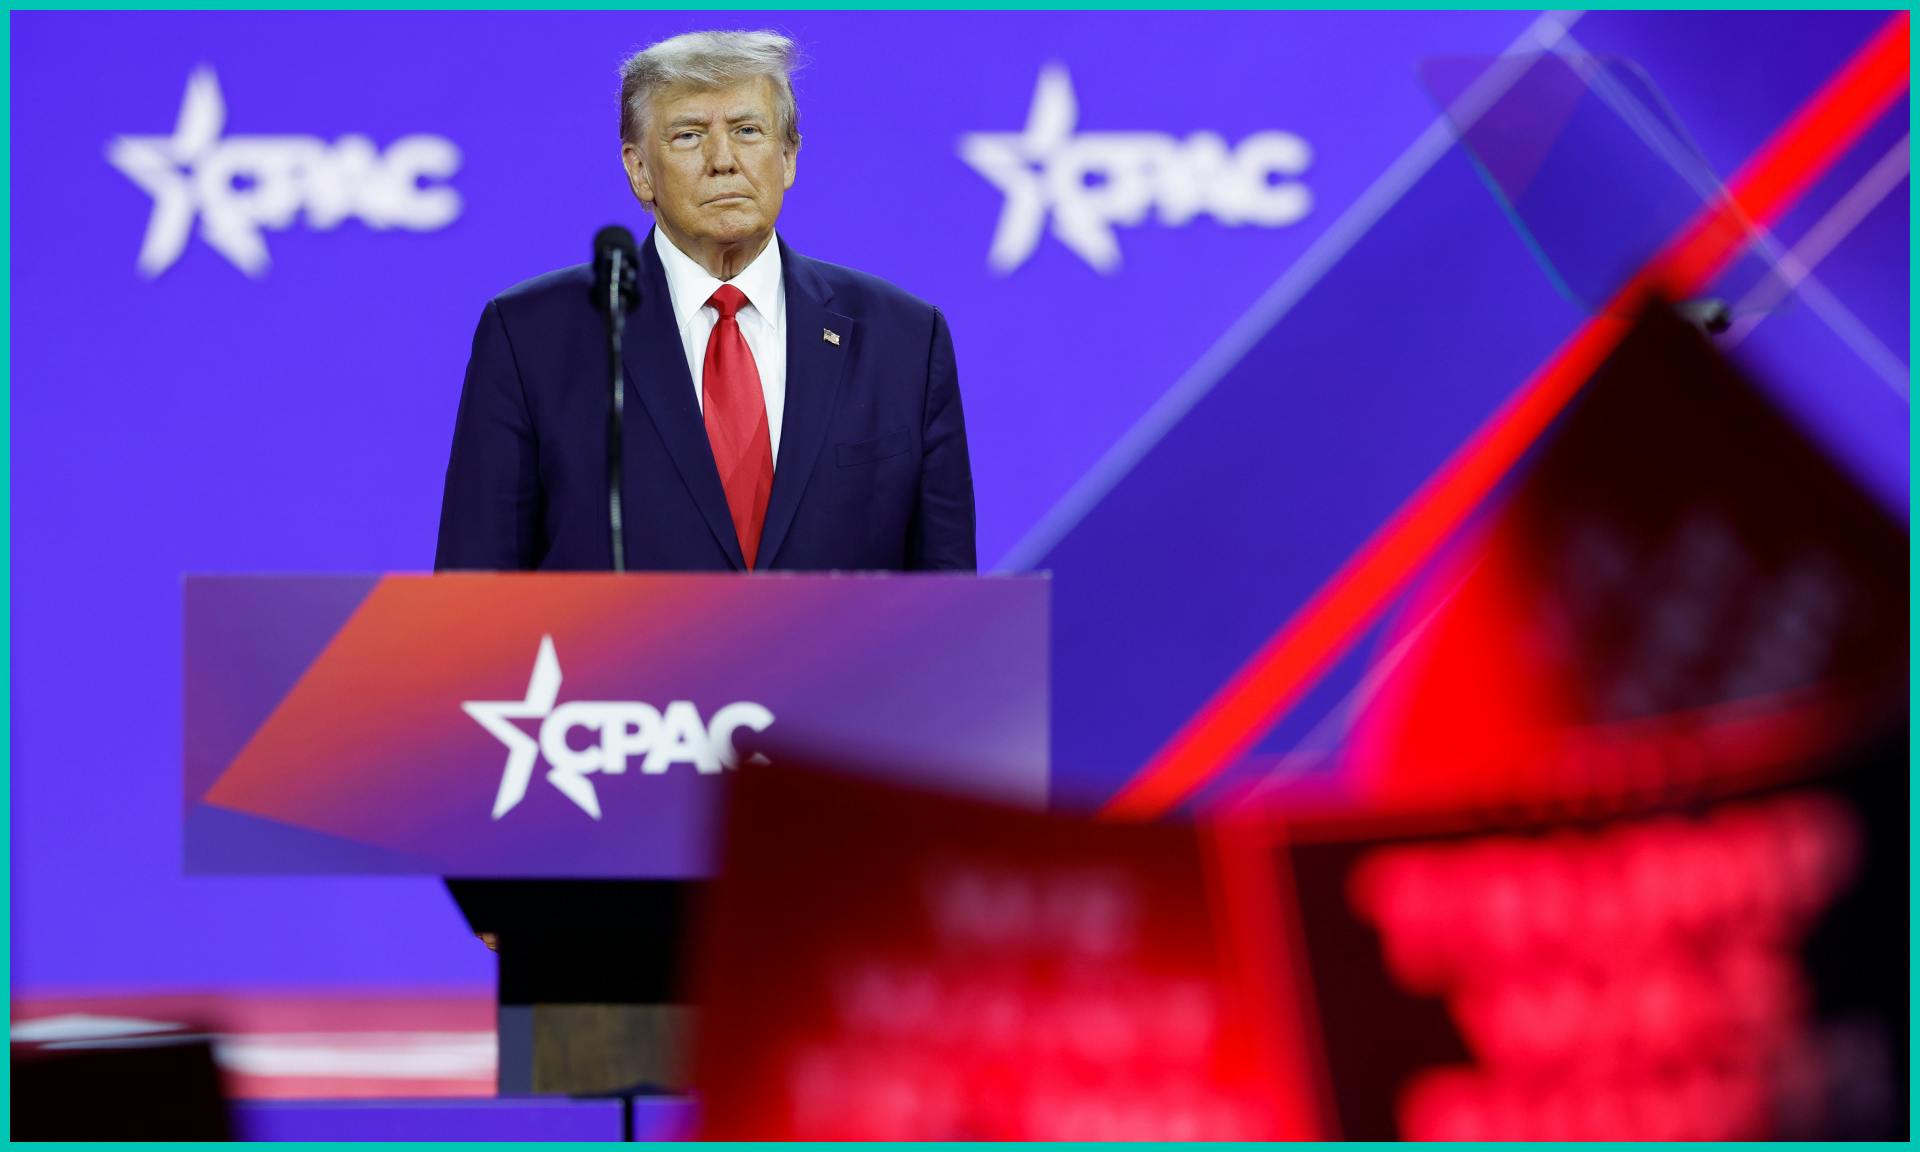 Former U.S. President Donald Trump arrives to address the annual Conservative Political Action Conference (CPAC) at Gaylord National Resort & Convention Center on March 4, 2023